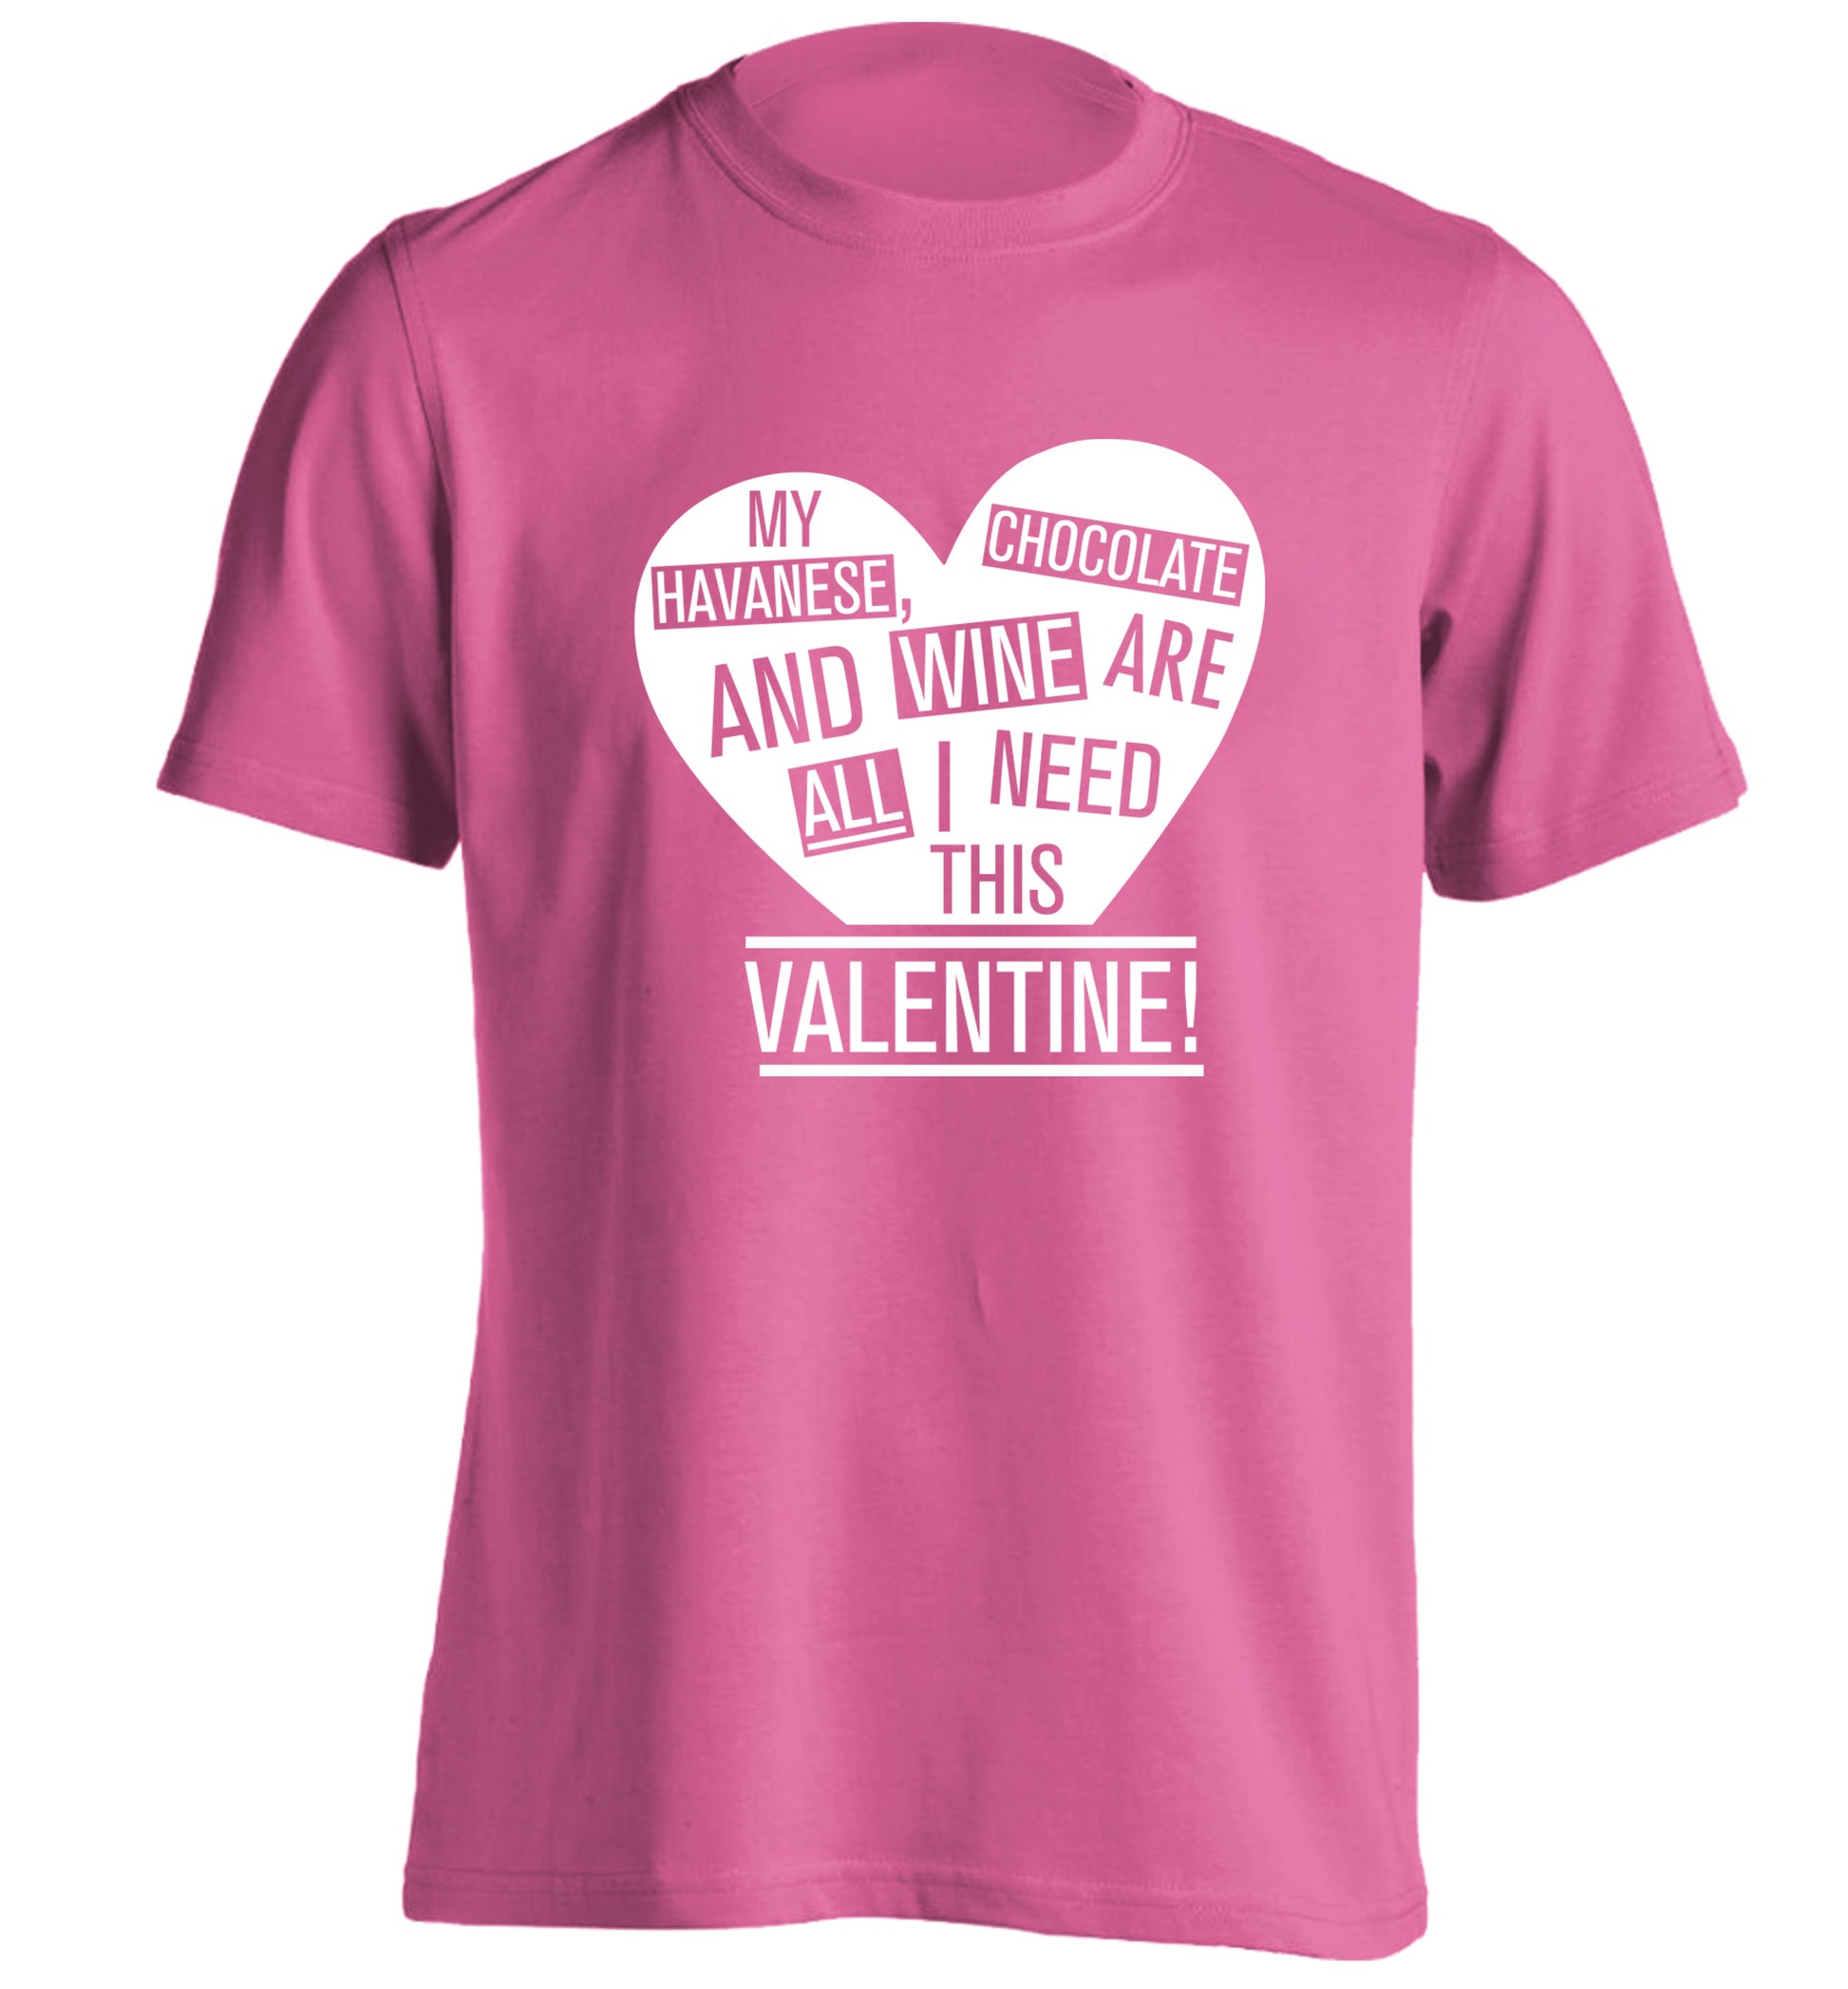 My havanese, chocolate and wine are all I need this valentine! adults unisex pink Tshirt 2XL